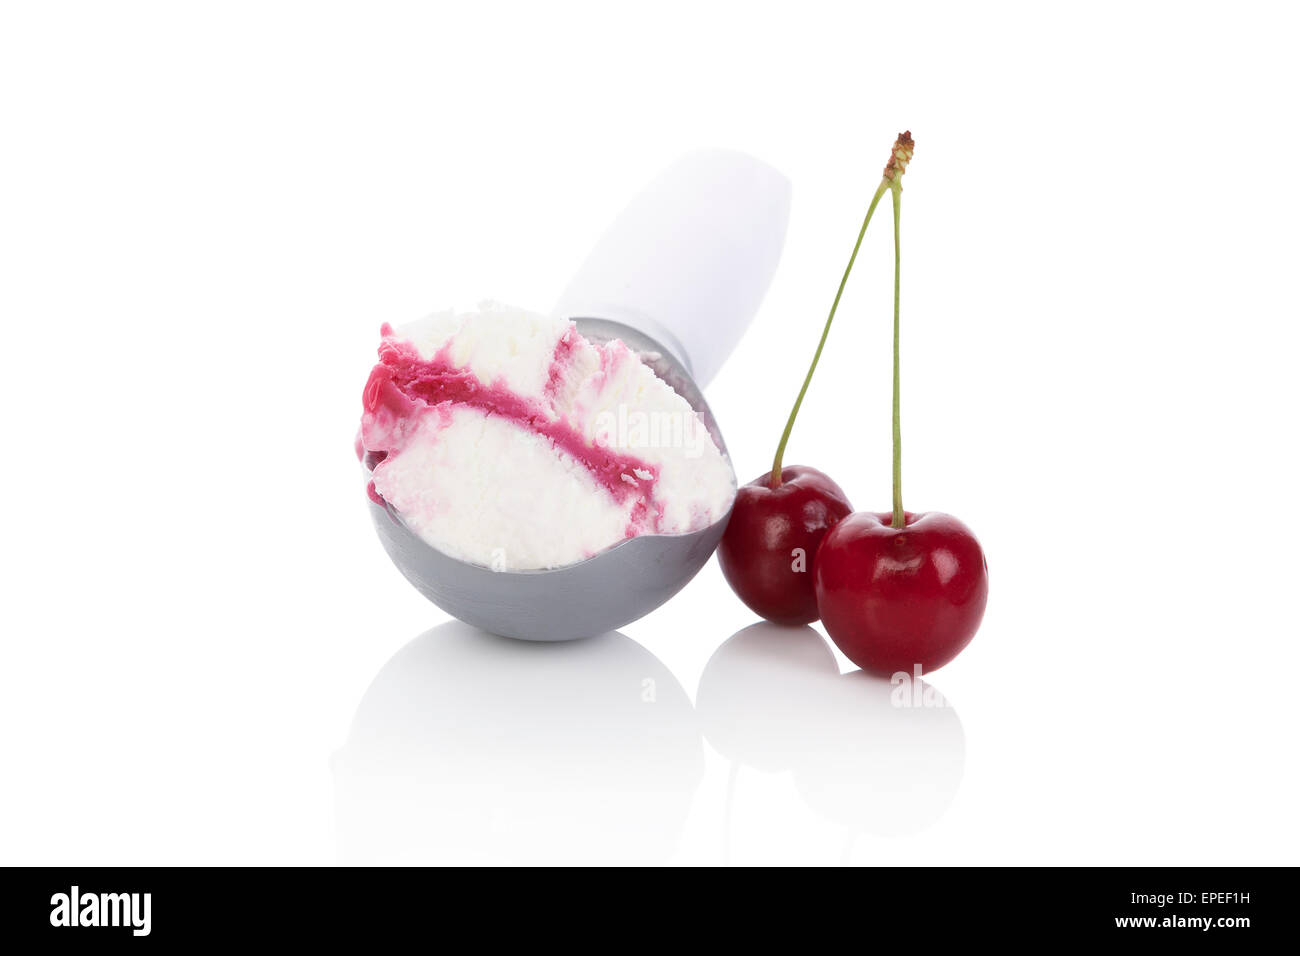 Cherry ice cream on scoop and fresh cherry fruit isolated on white background. Summer concept. Stock Photo